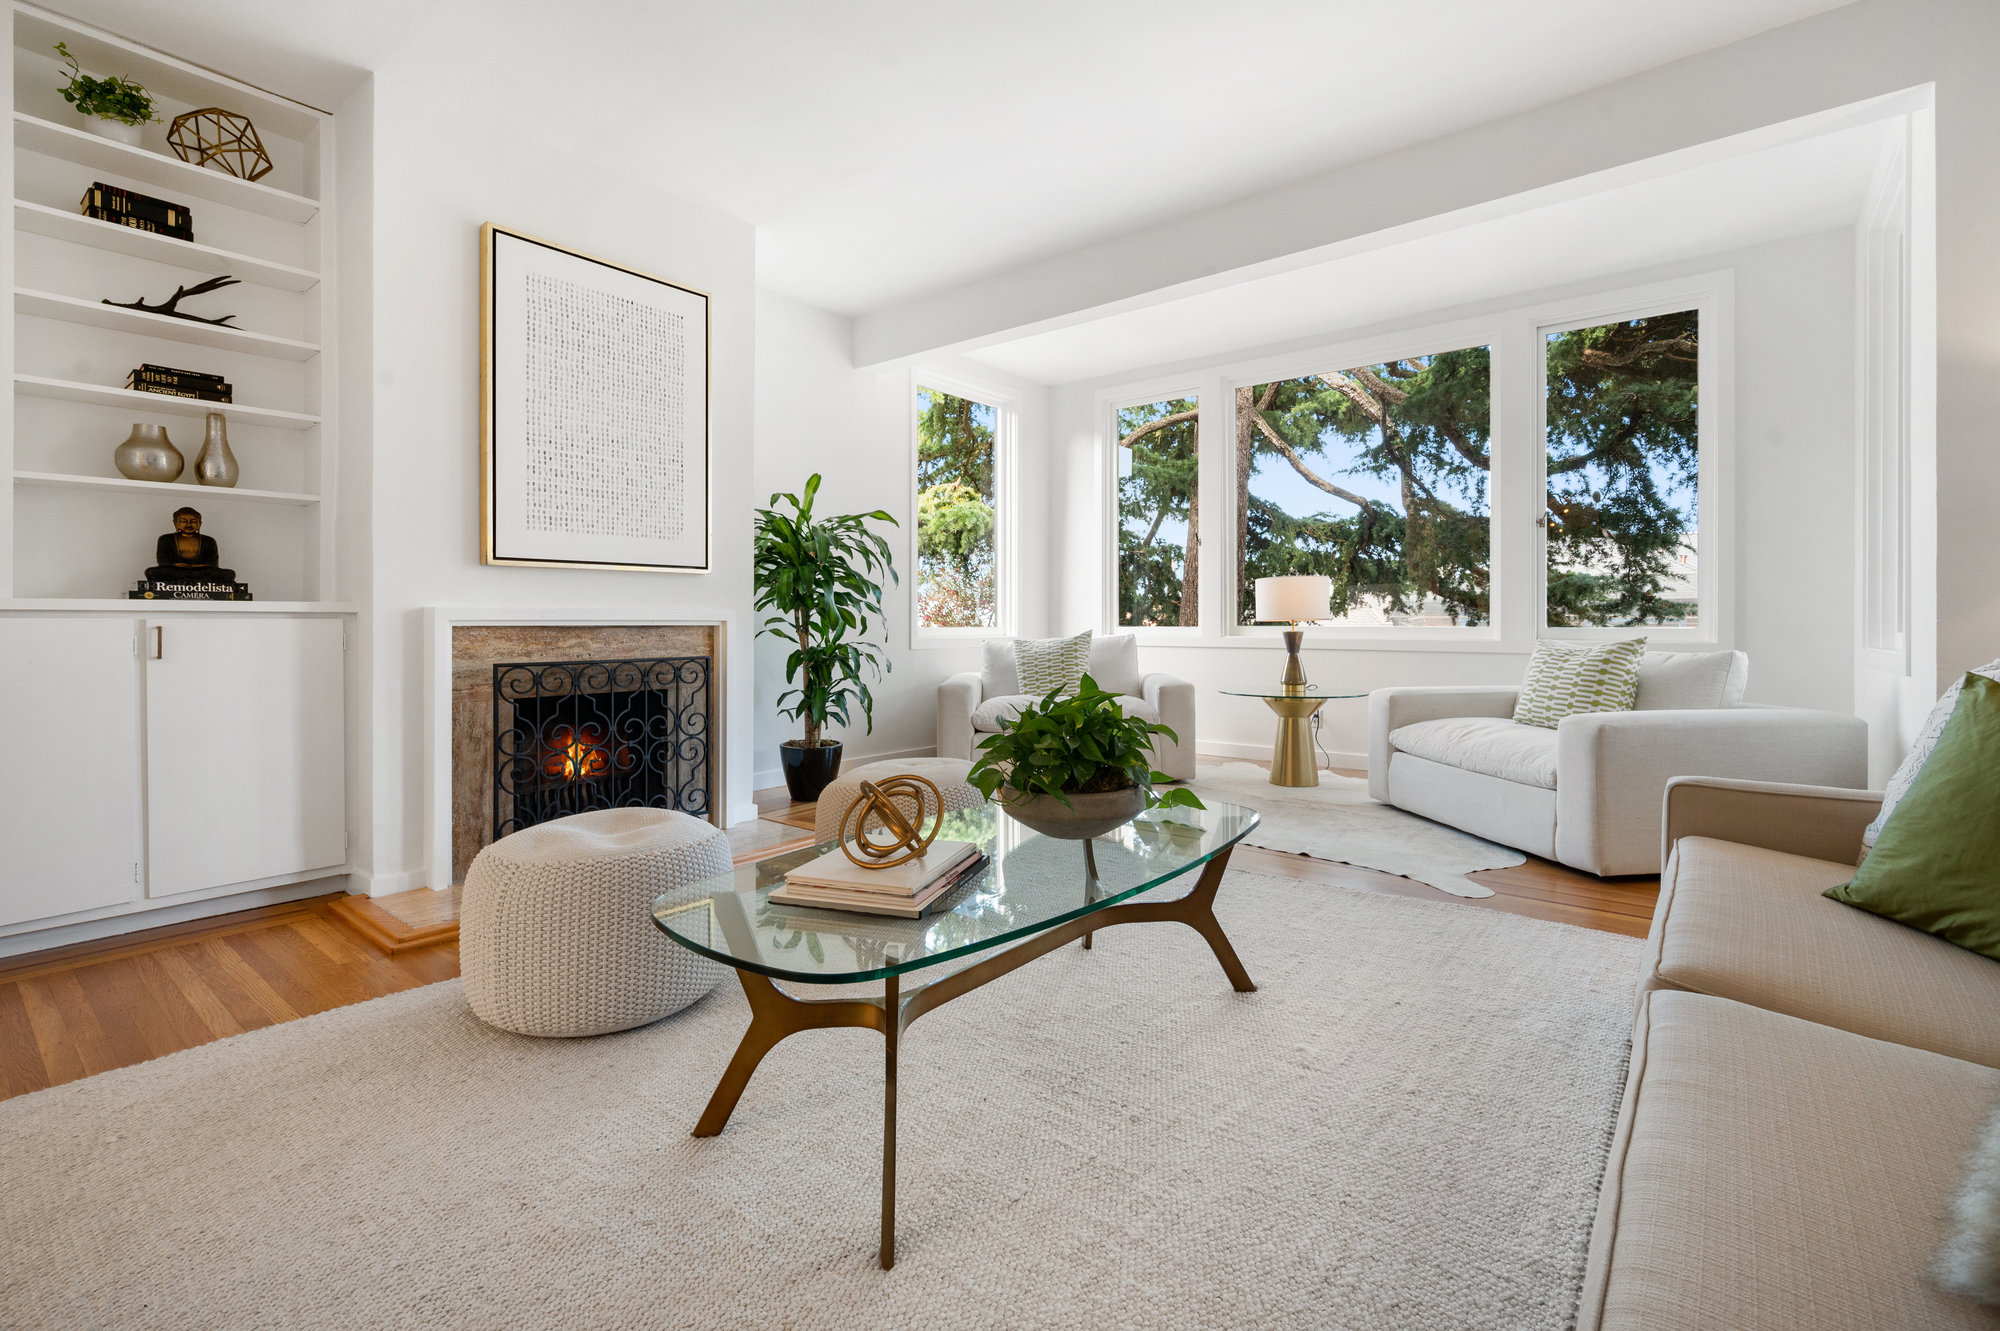 Property Photo: Side-view of the living room at 183 Edgewood Avenue, featuring large windows